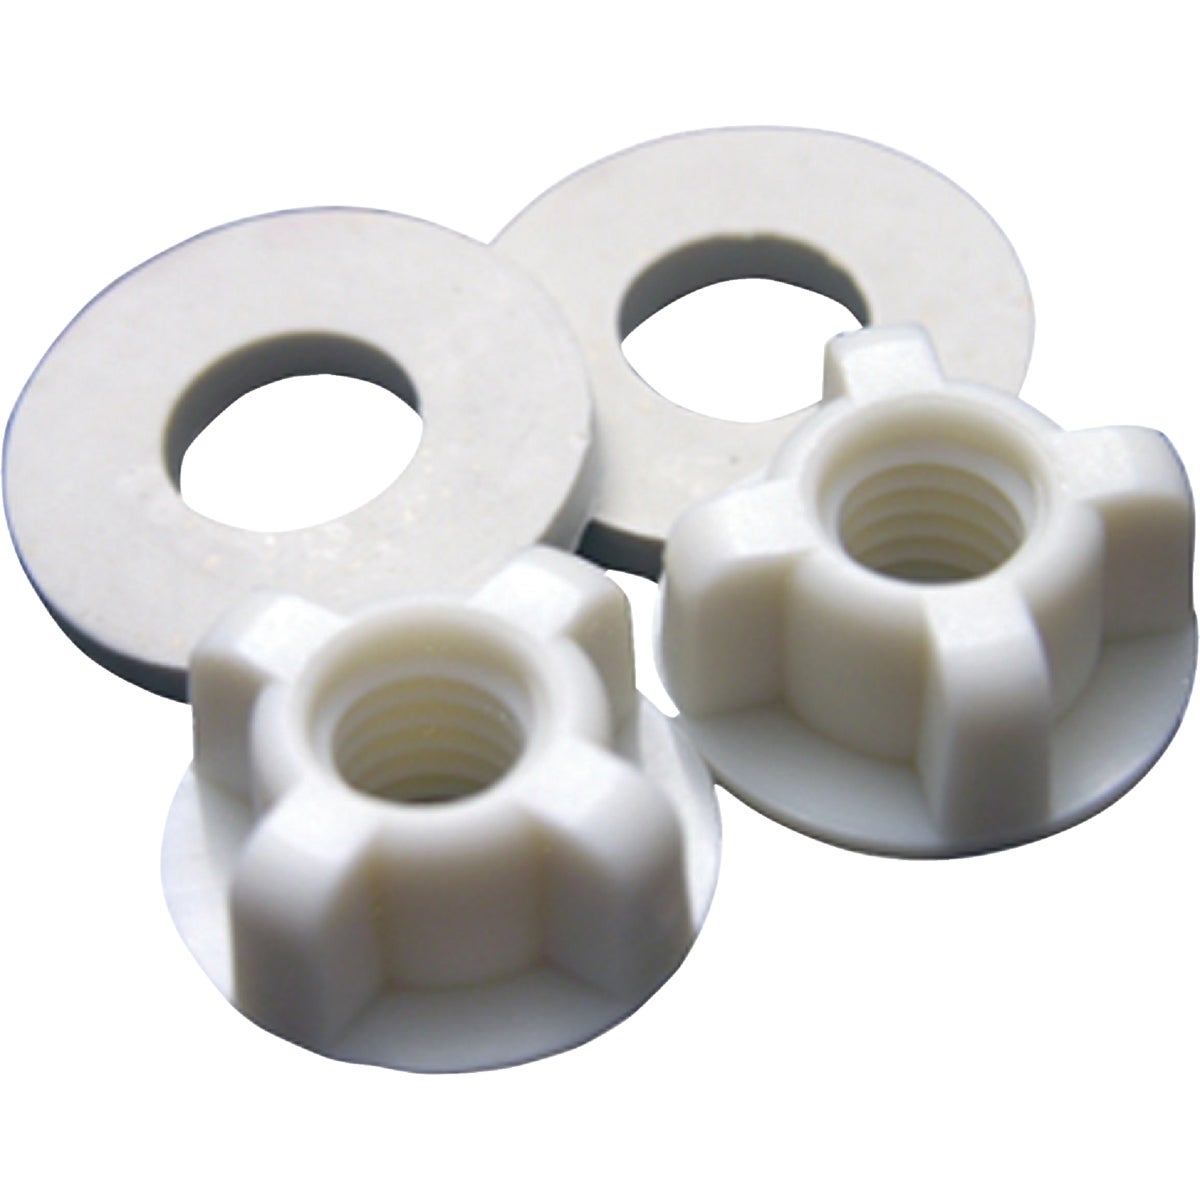 Lasco 3/8" White Plastic Toilet Seat Bolt, Includes Nuts and Washers